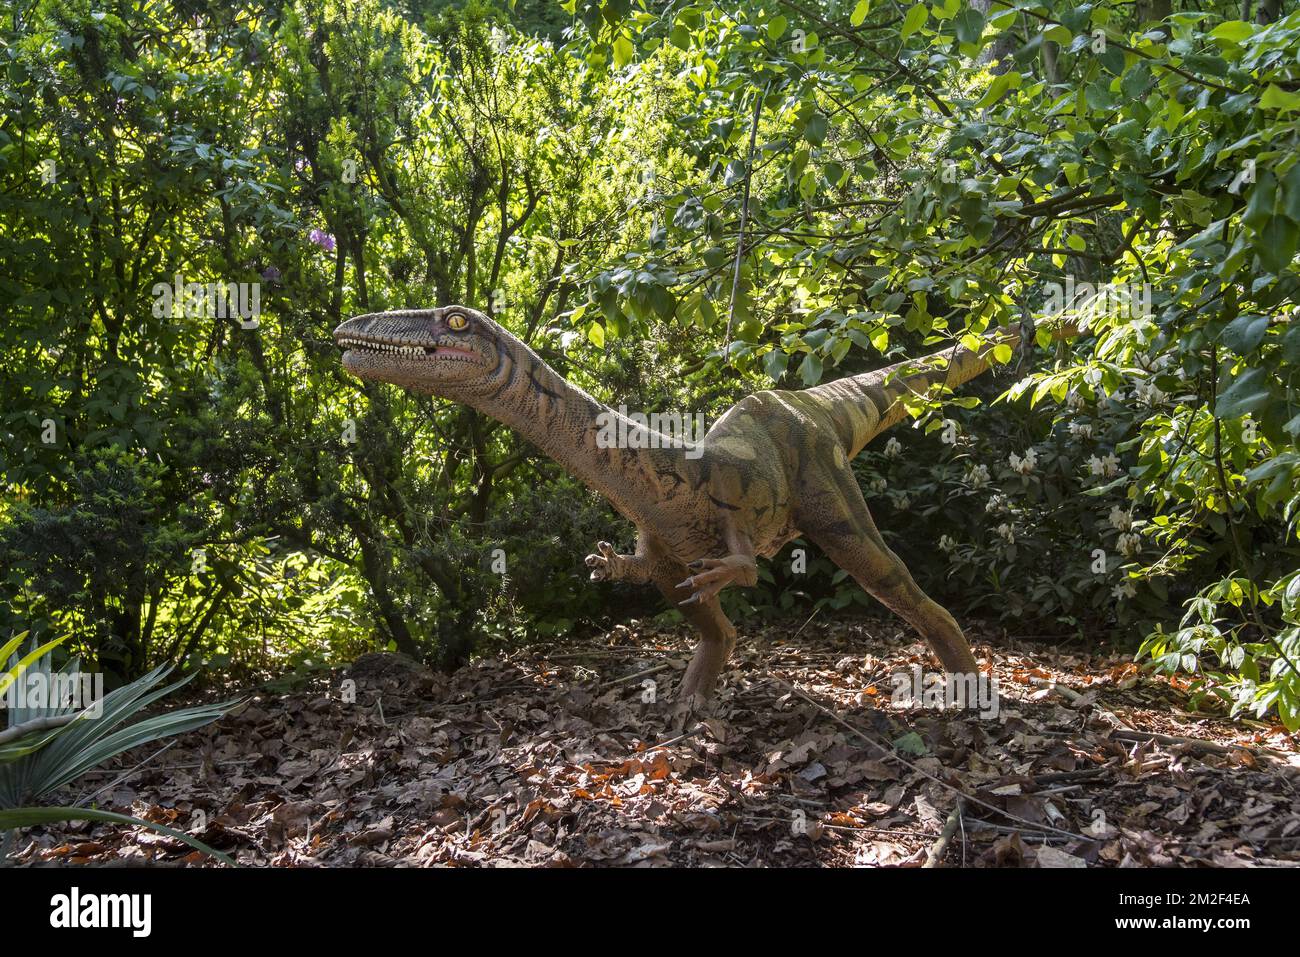 Realistic lifesize replica of Coelophysis, coelophysid theropod dinosaur from the Triassic Period | Réplique de Coelophysis, dinosaure du Trias supérieur 09/05/2018 Stock Photo